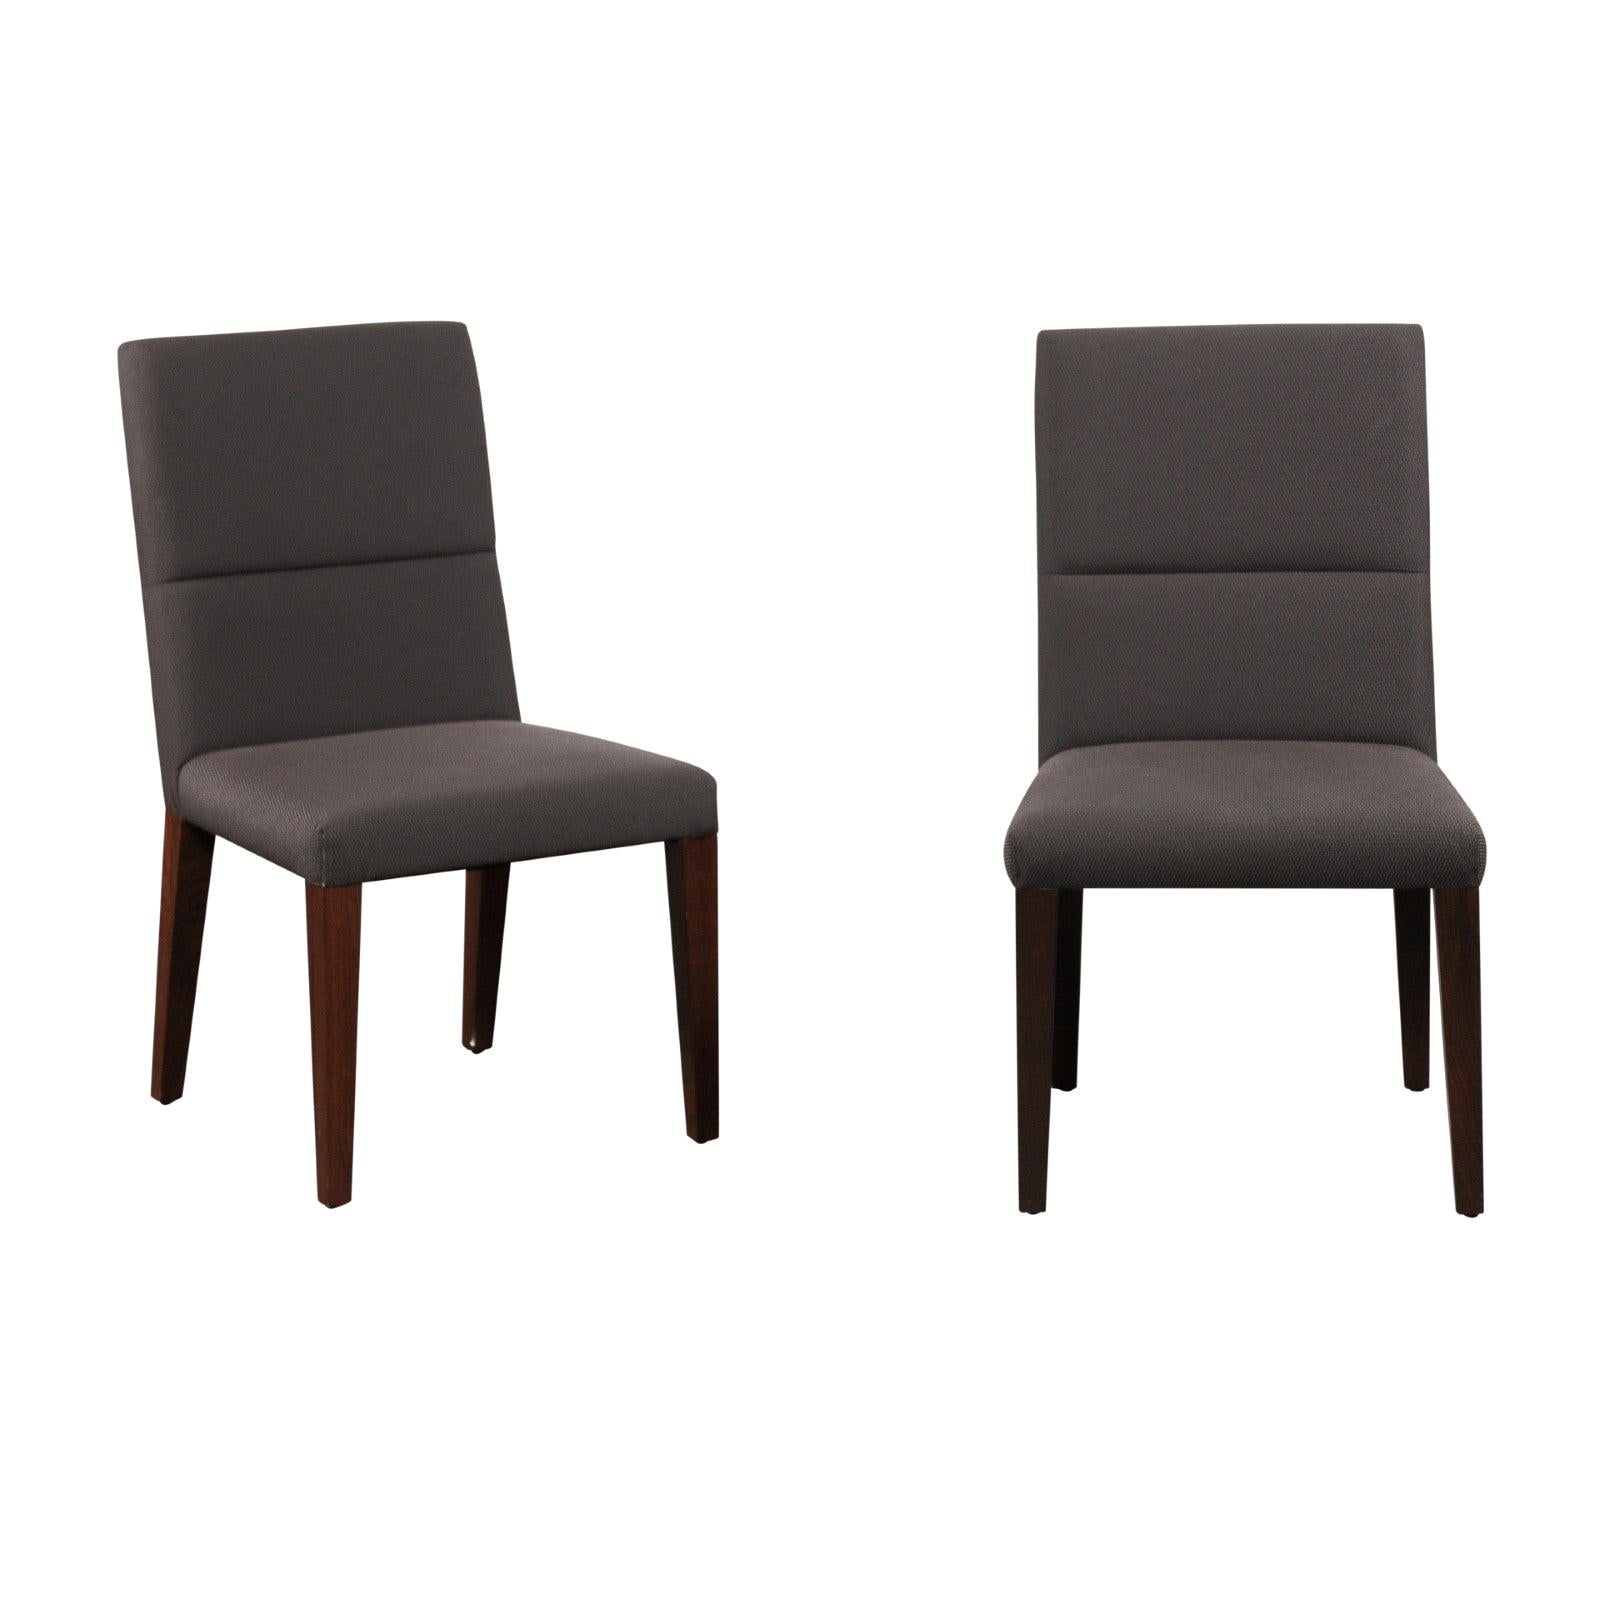 Pair of Calvin Klein Home Contemporary Upholstered Side Chairs For Sale at  1stDibs | calvin klein furniture, calvin klein home furniture, calvin klein  chair